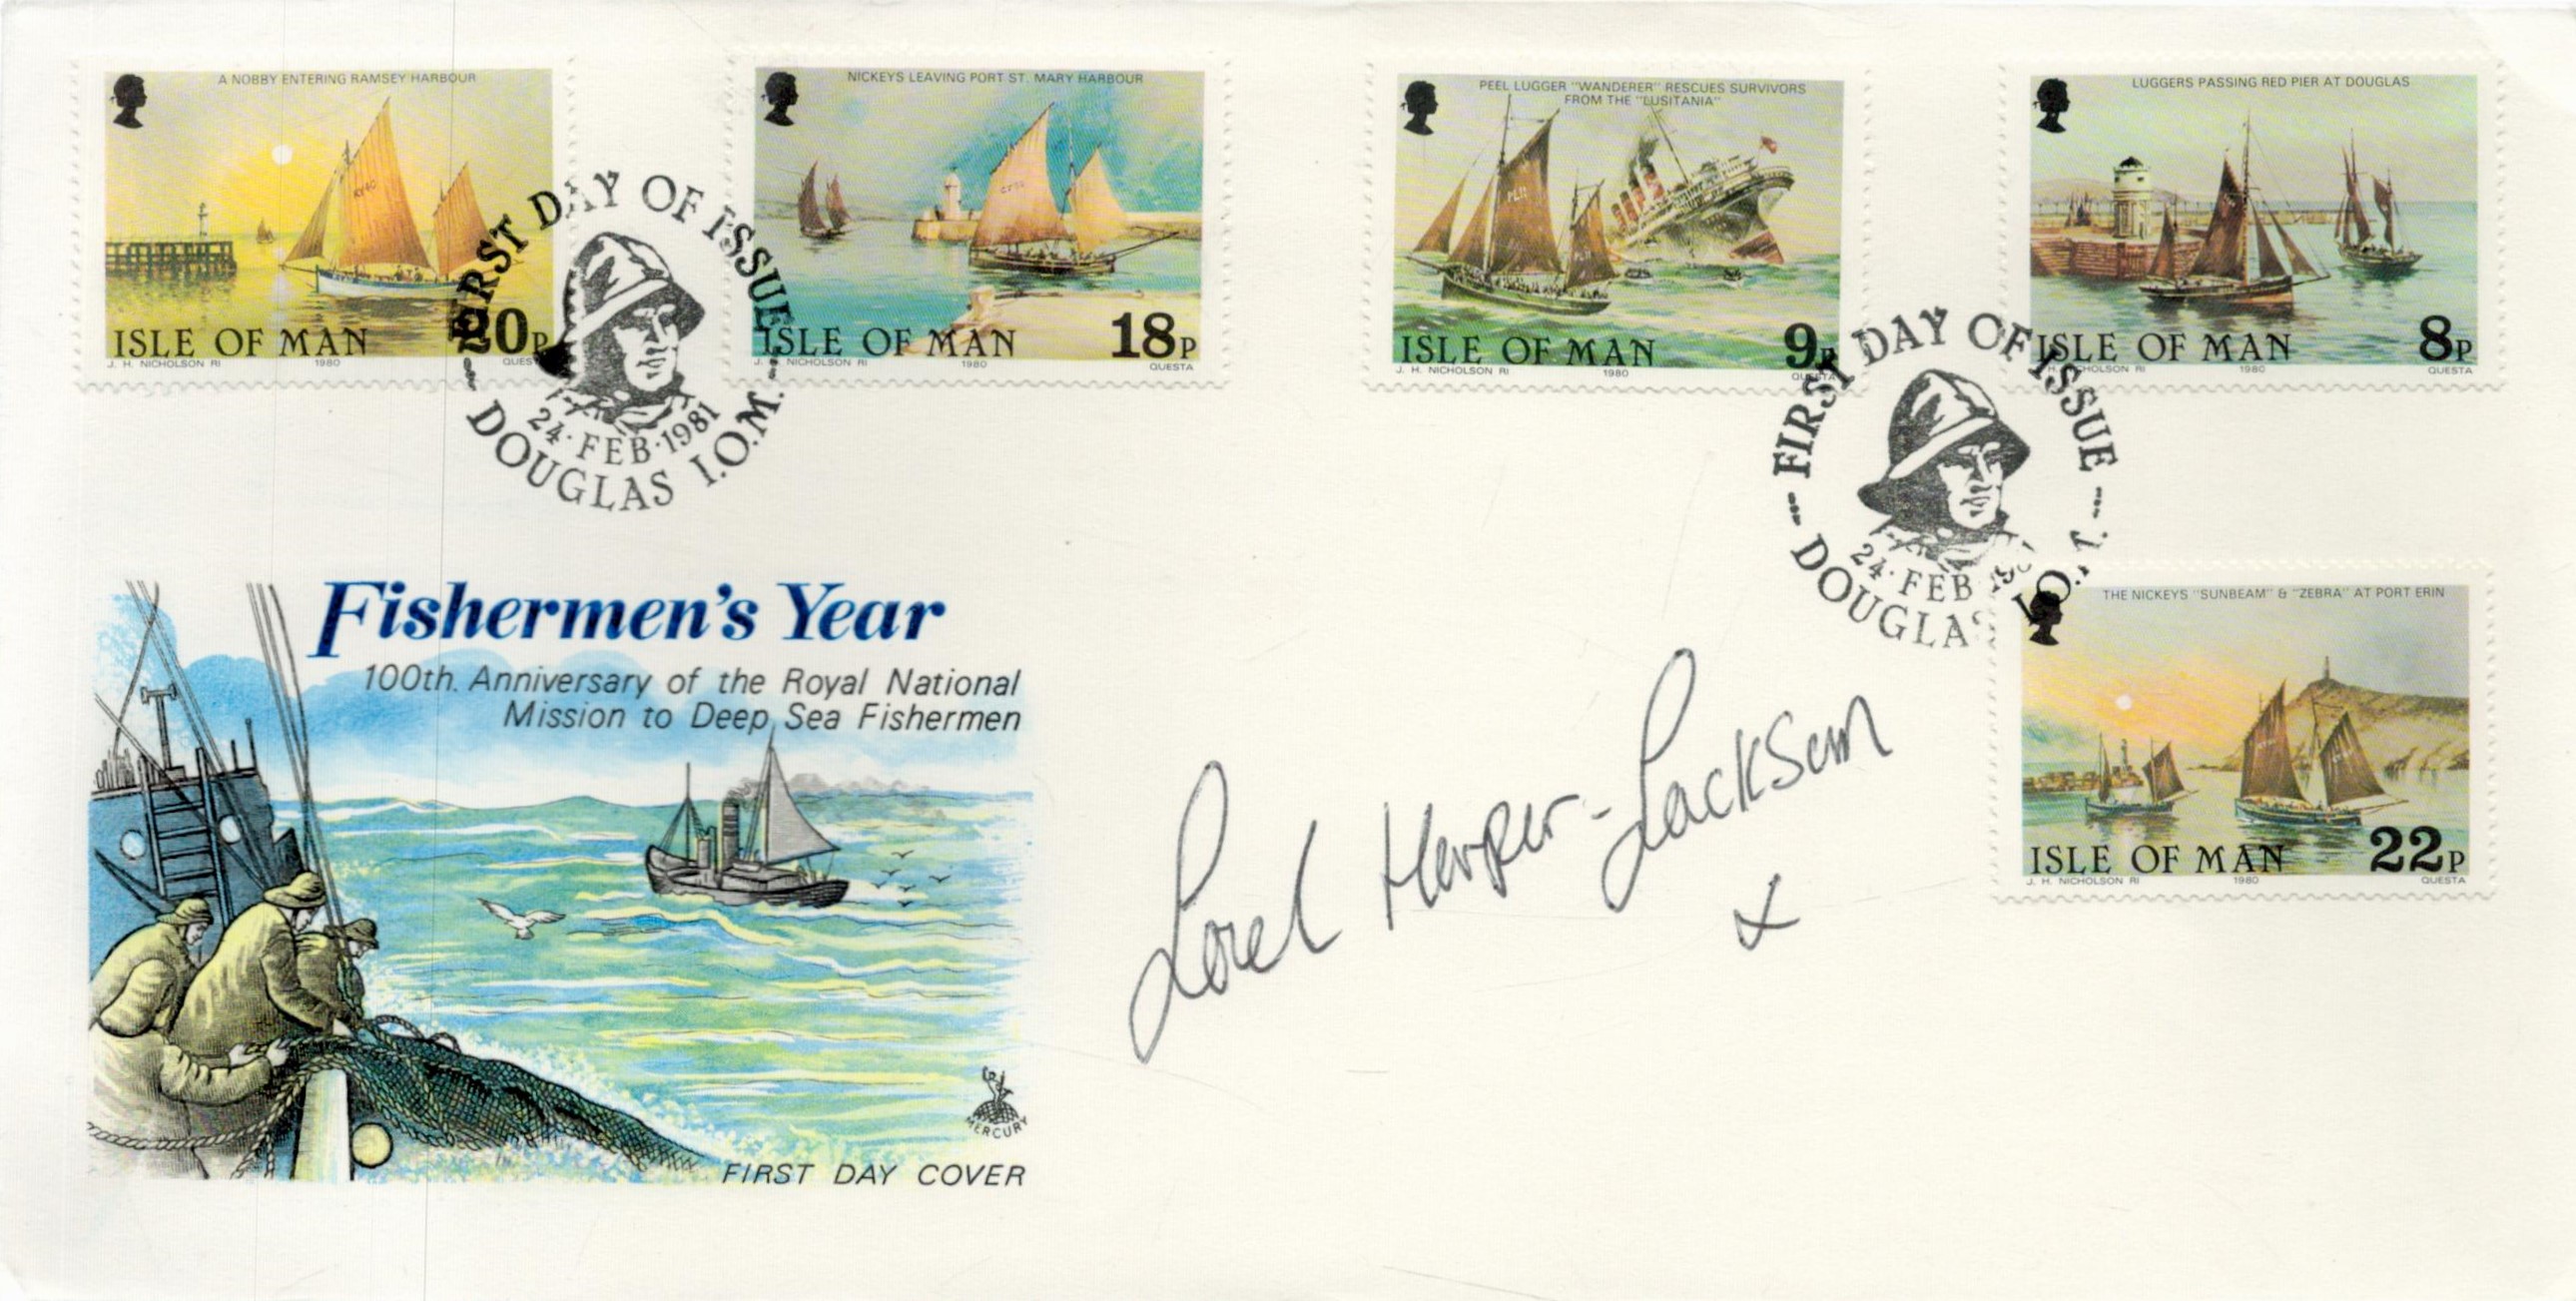 Joel Harper-Jackson signed FDC Fisherman's Year 100 Anniversary of the Royal National Mission to